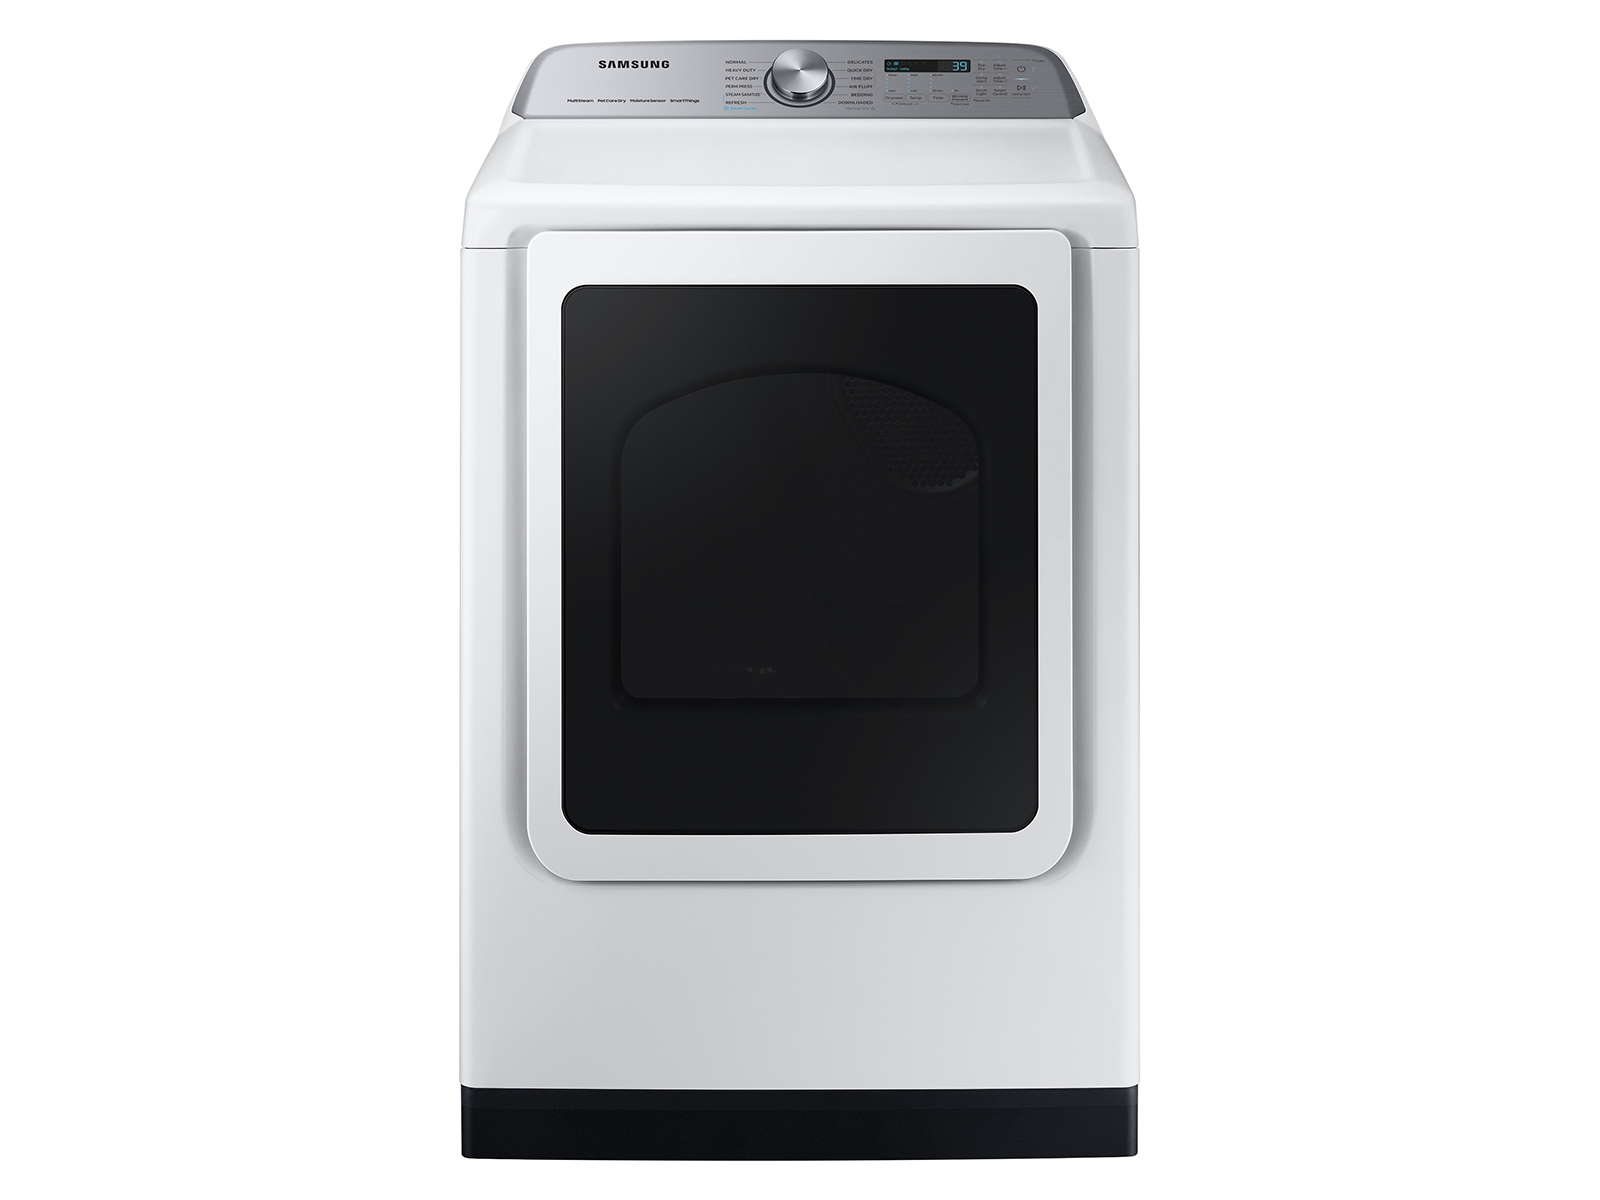 Photos - Tumble Dryer Samsung 7.4 cu. ft. Smart Electric Dryer with Pet Care Dry and Steam Sanit 